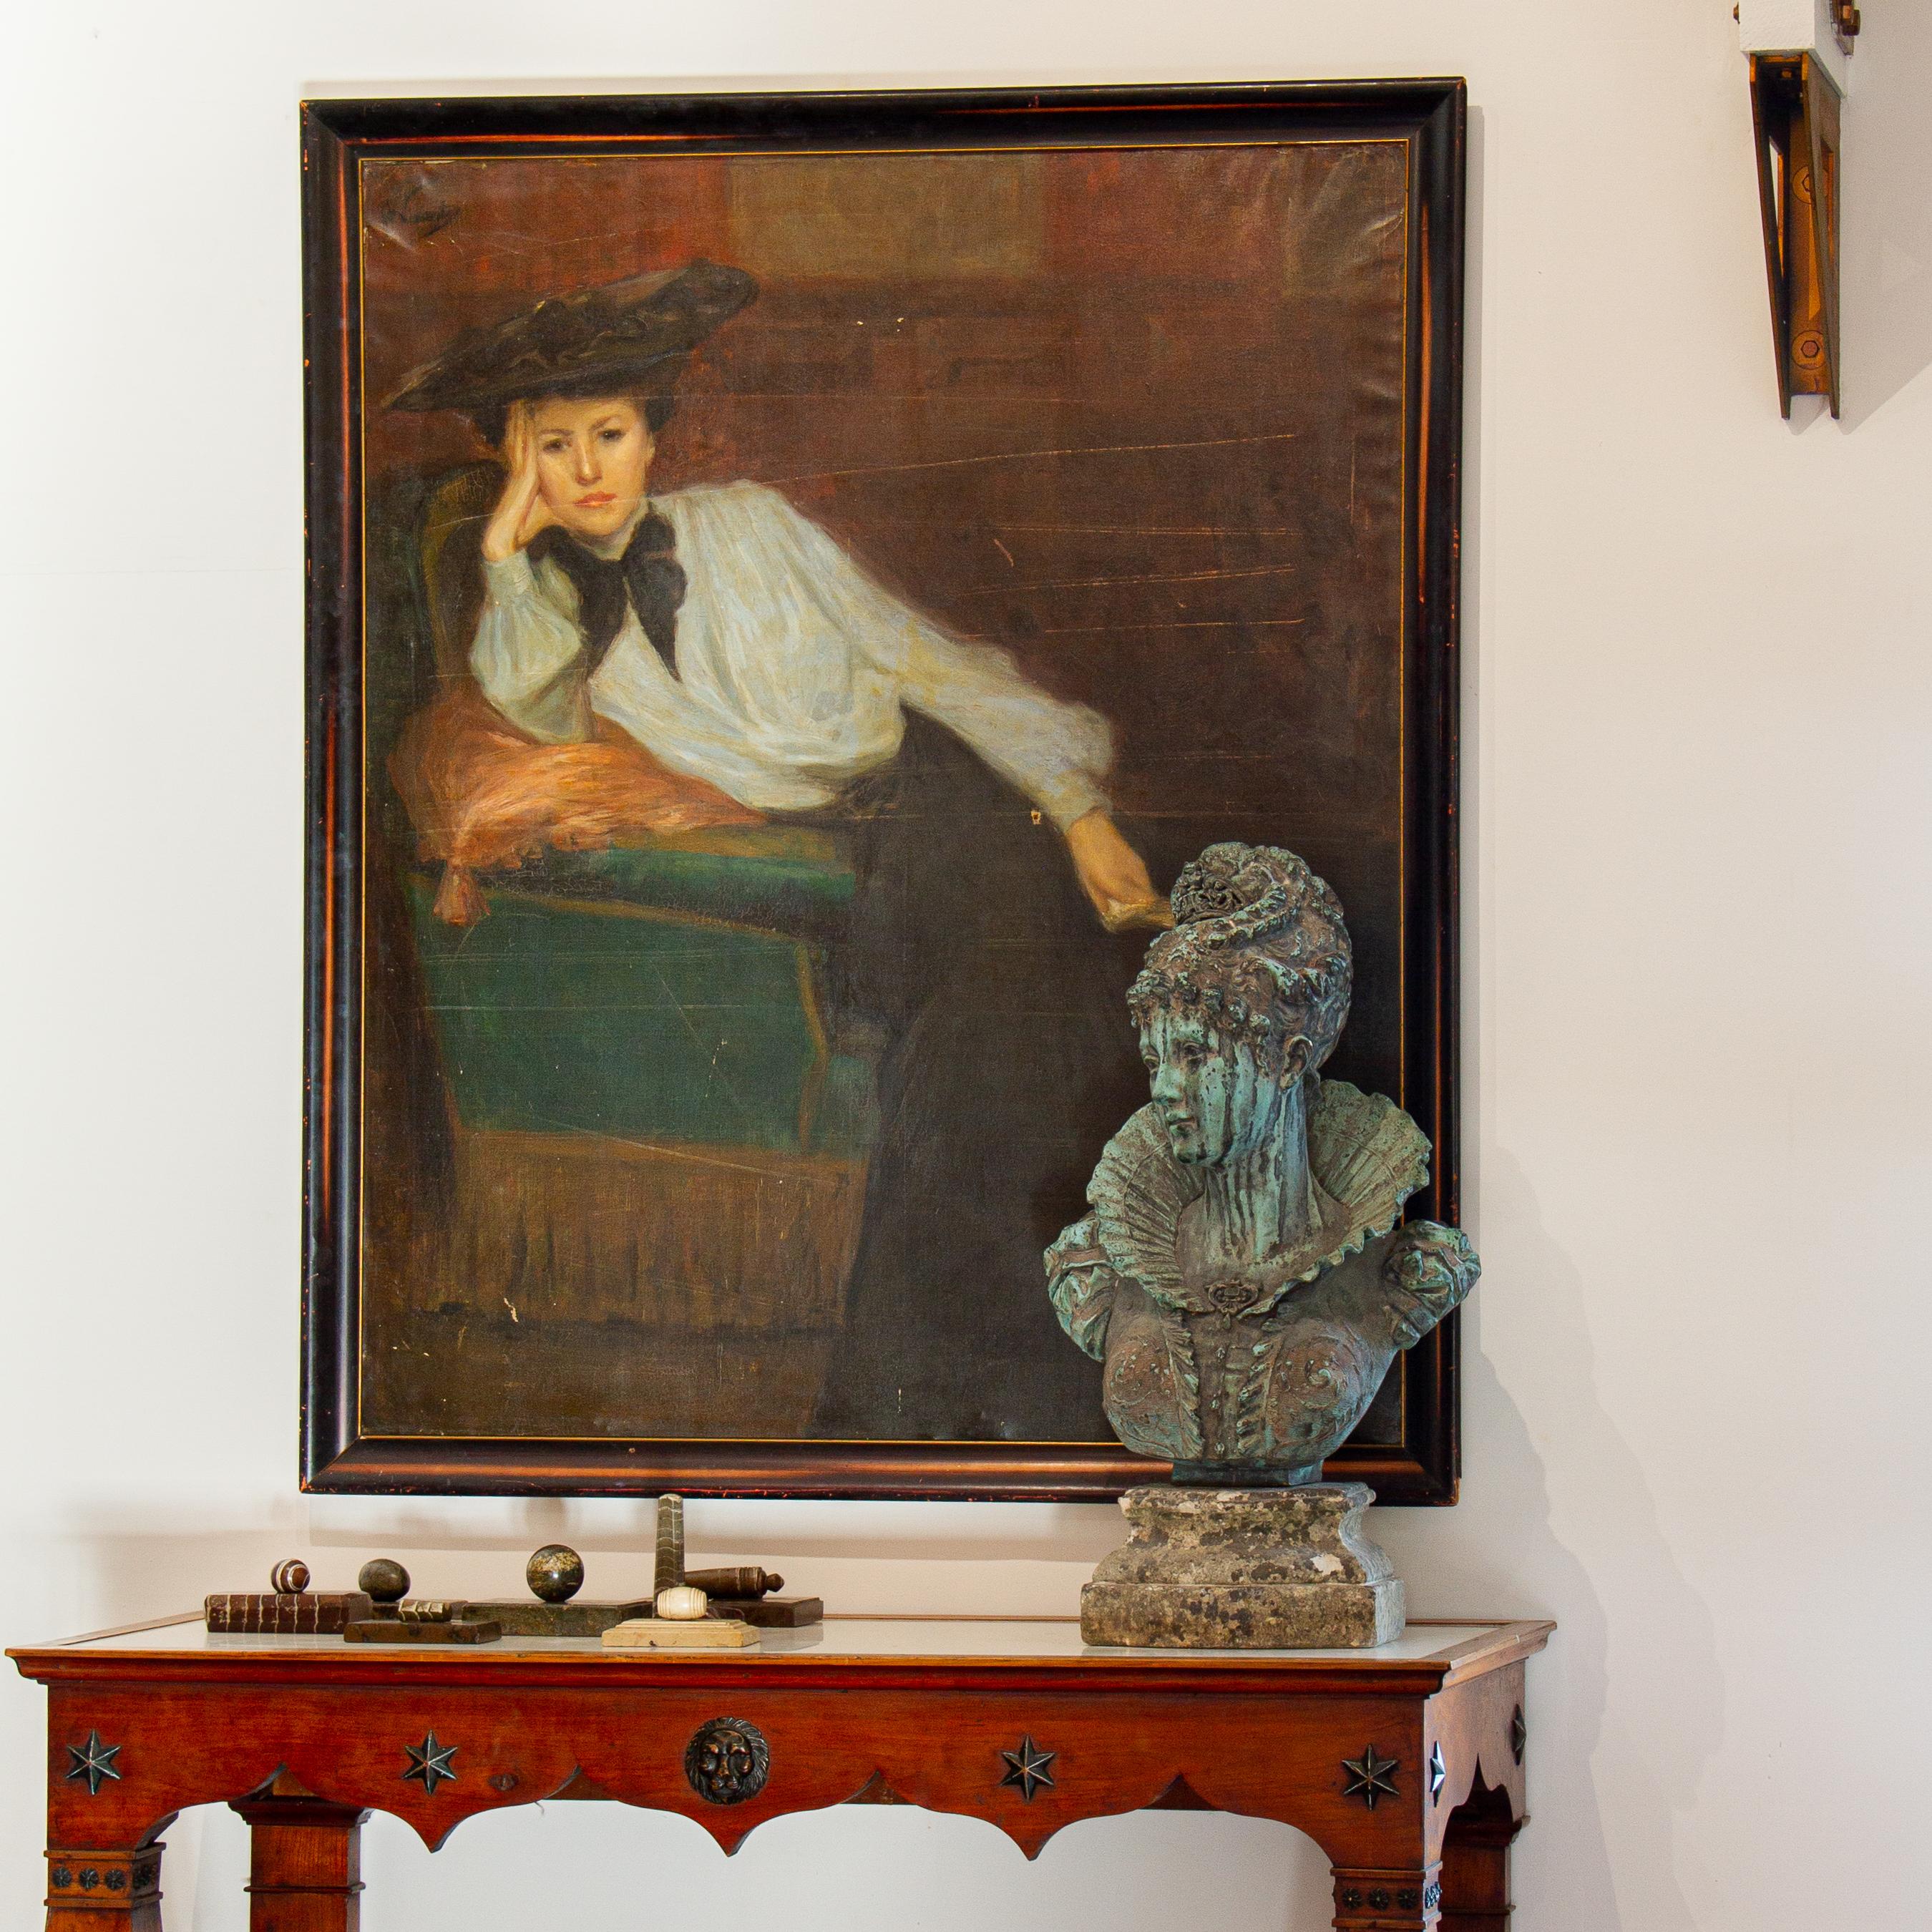 A large 19th century painting on original untouched canvas, with original stretcher and frame of an elegant, pensive lady inclining against a vibrant green chair. Signed upper right hand corner A. Vivante and titled 'Interior with young woman in